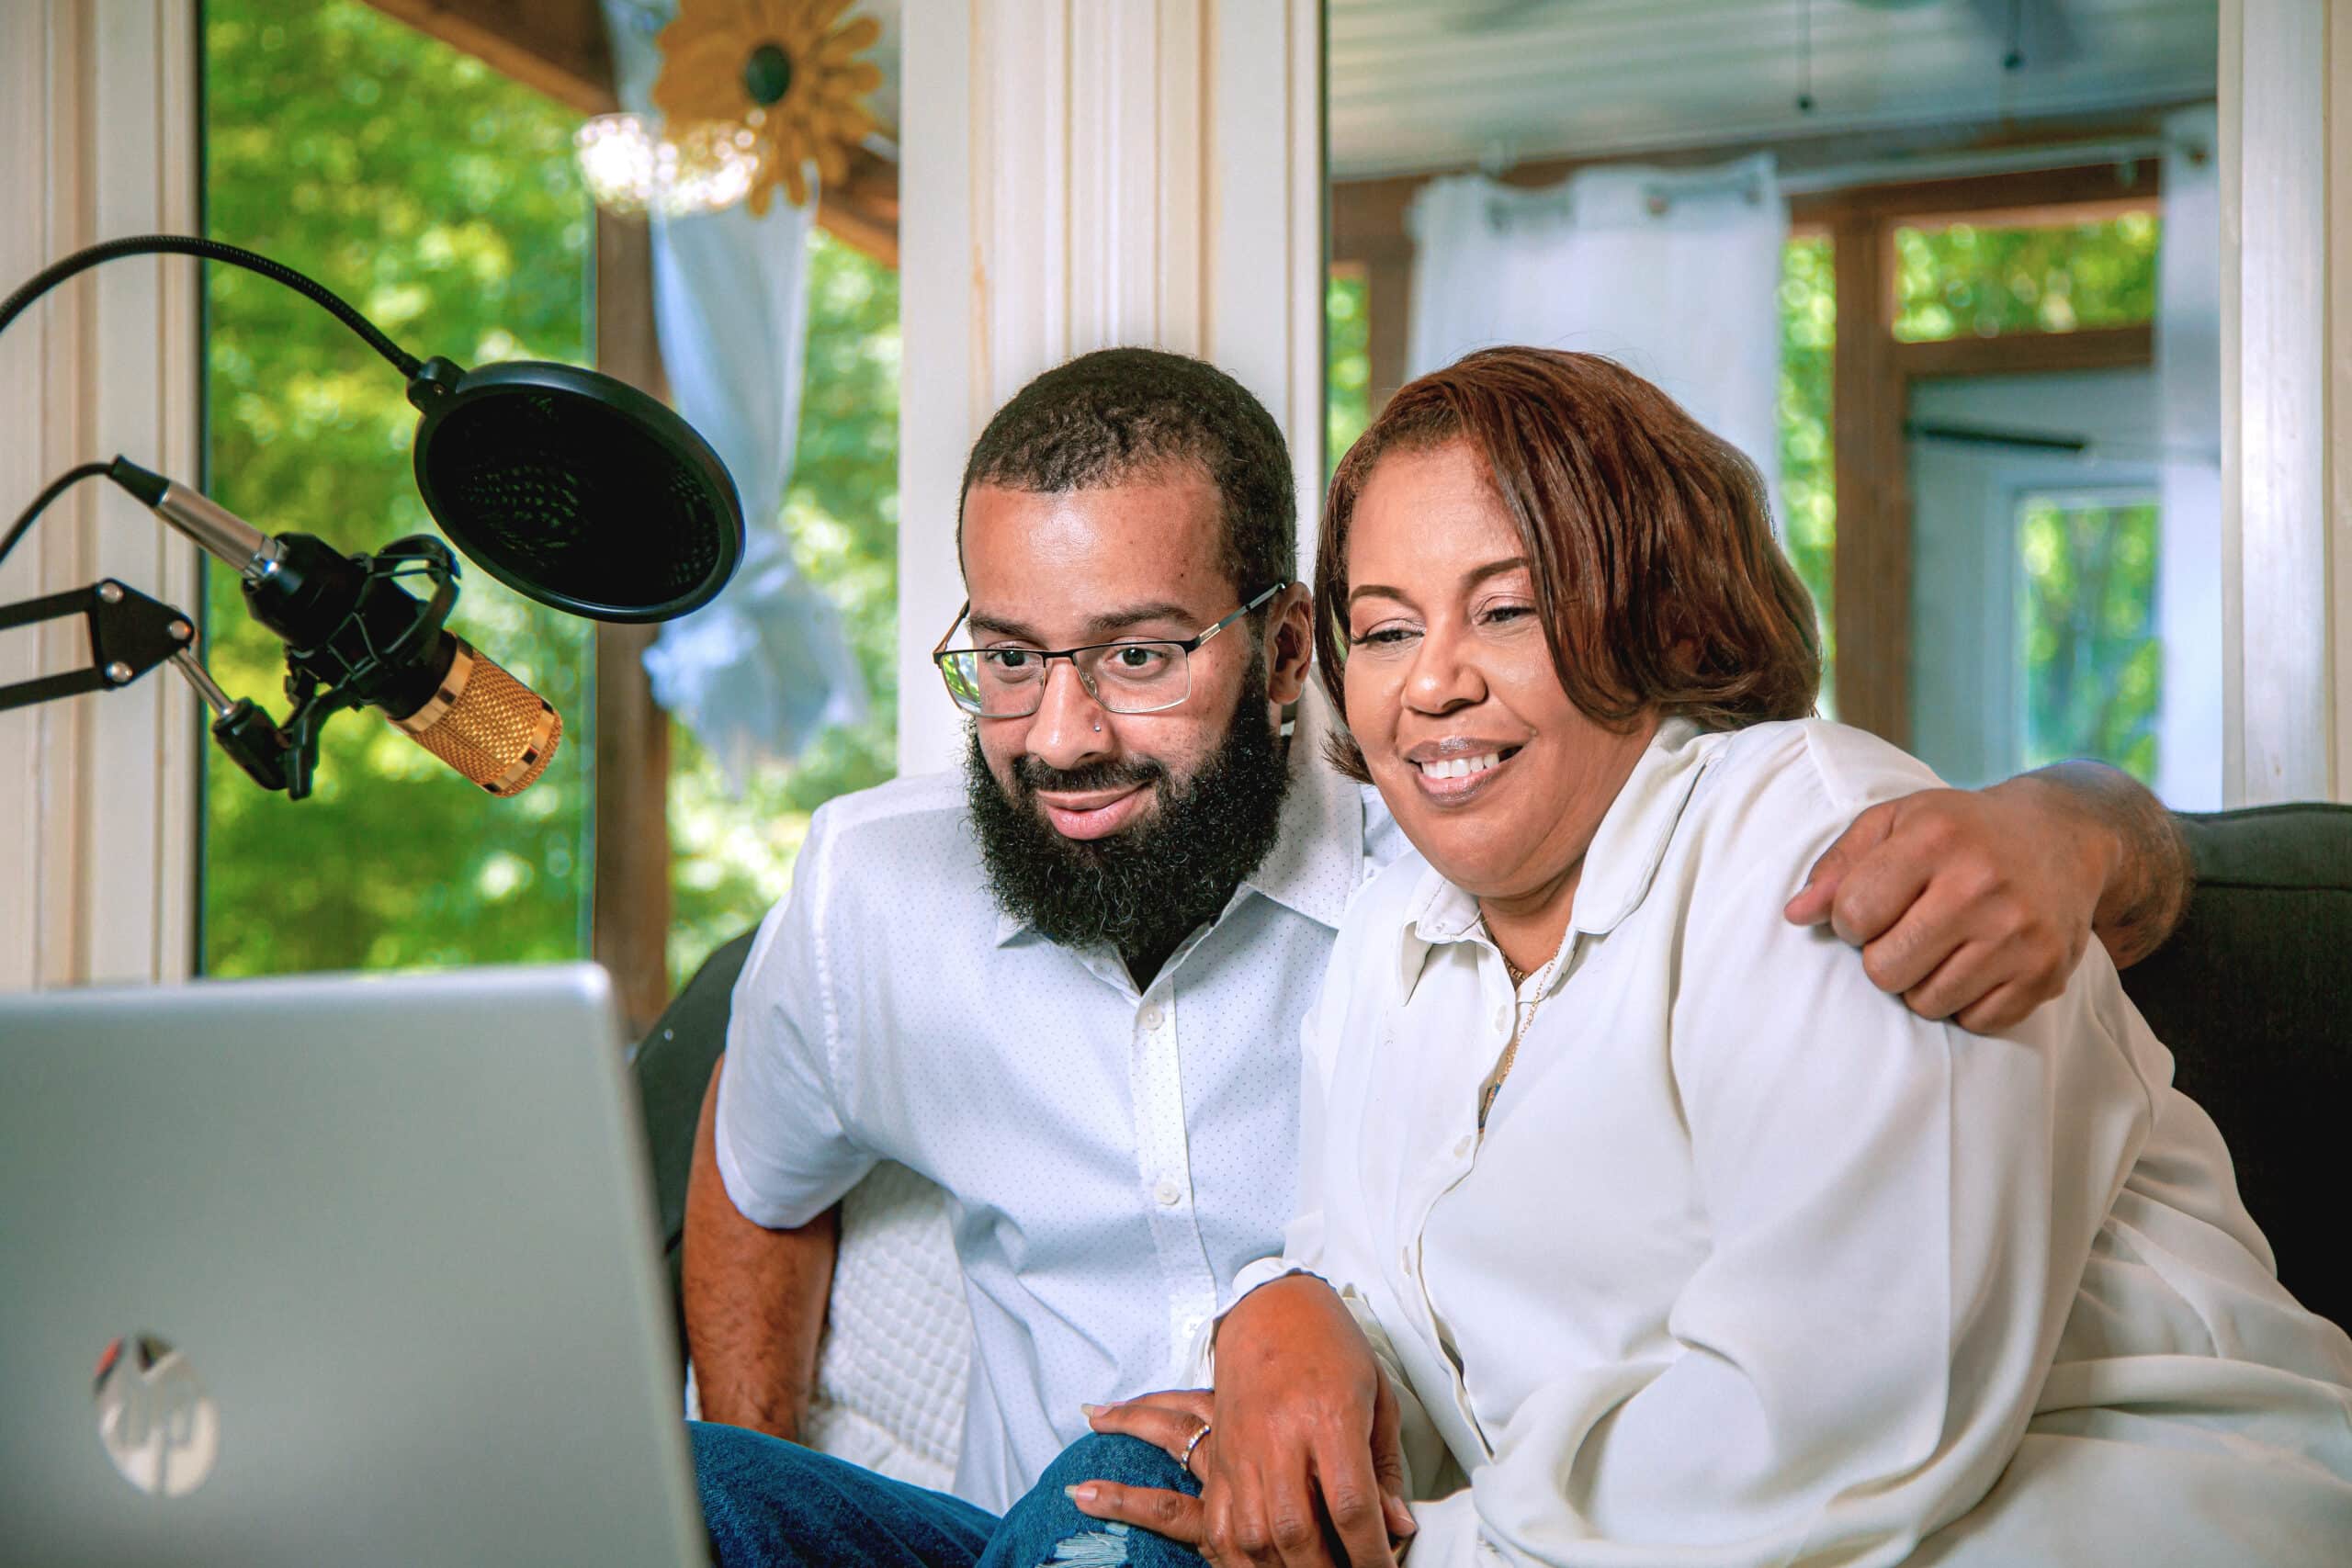 middle aged Black woman and her adult son smile together and look at laptop screen